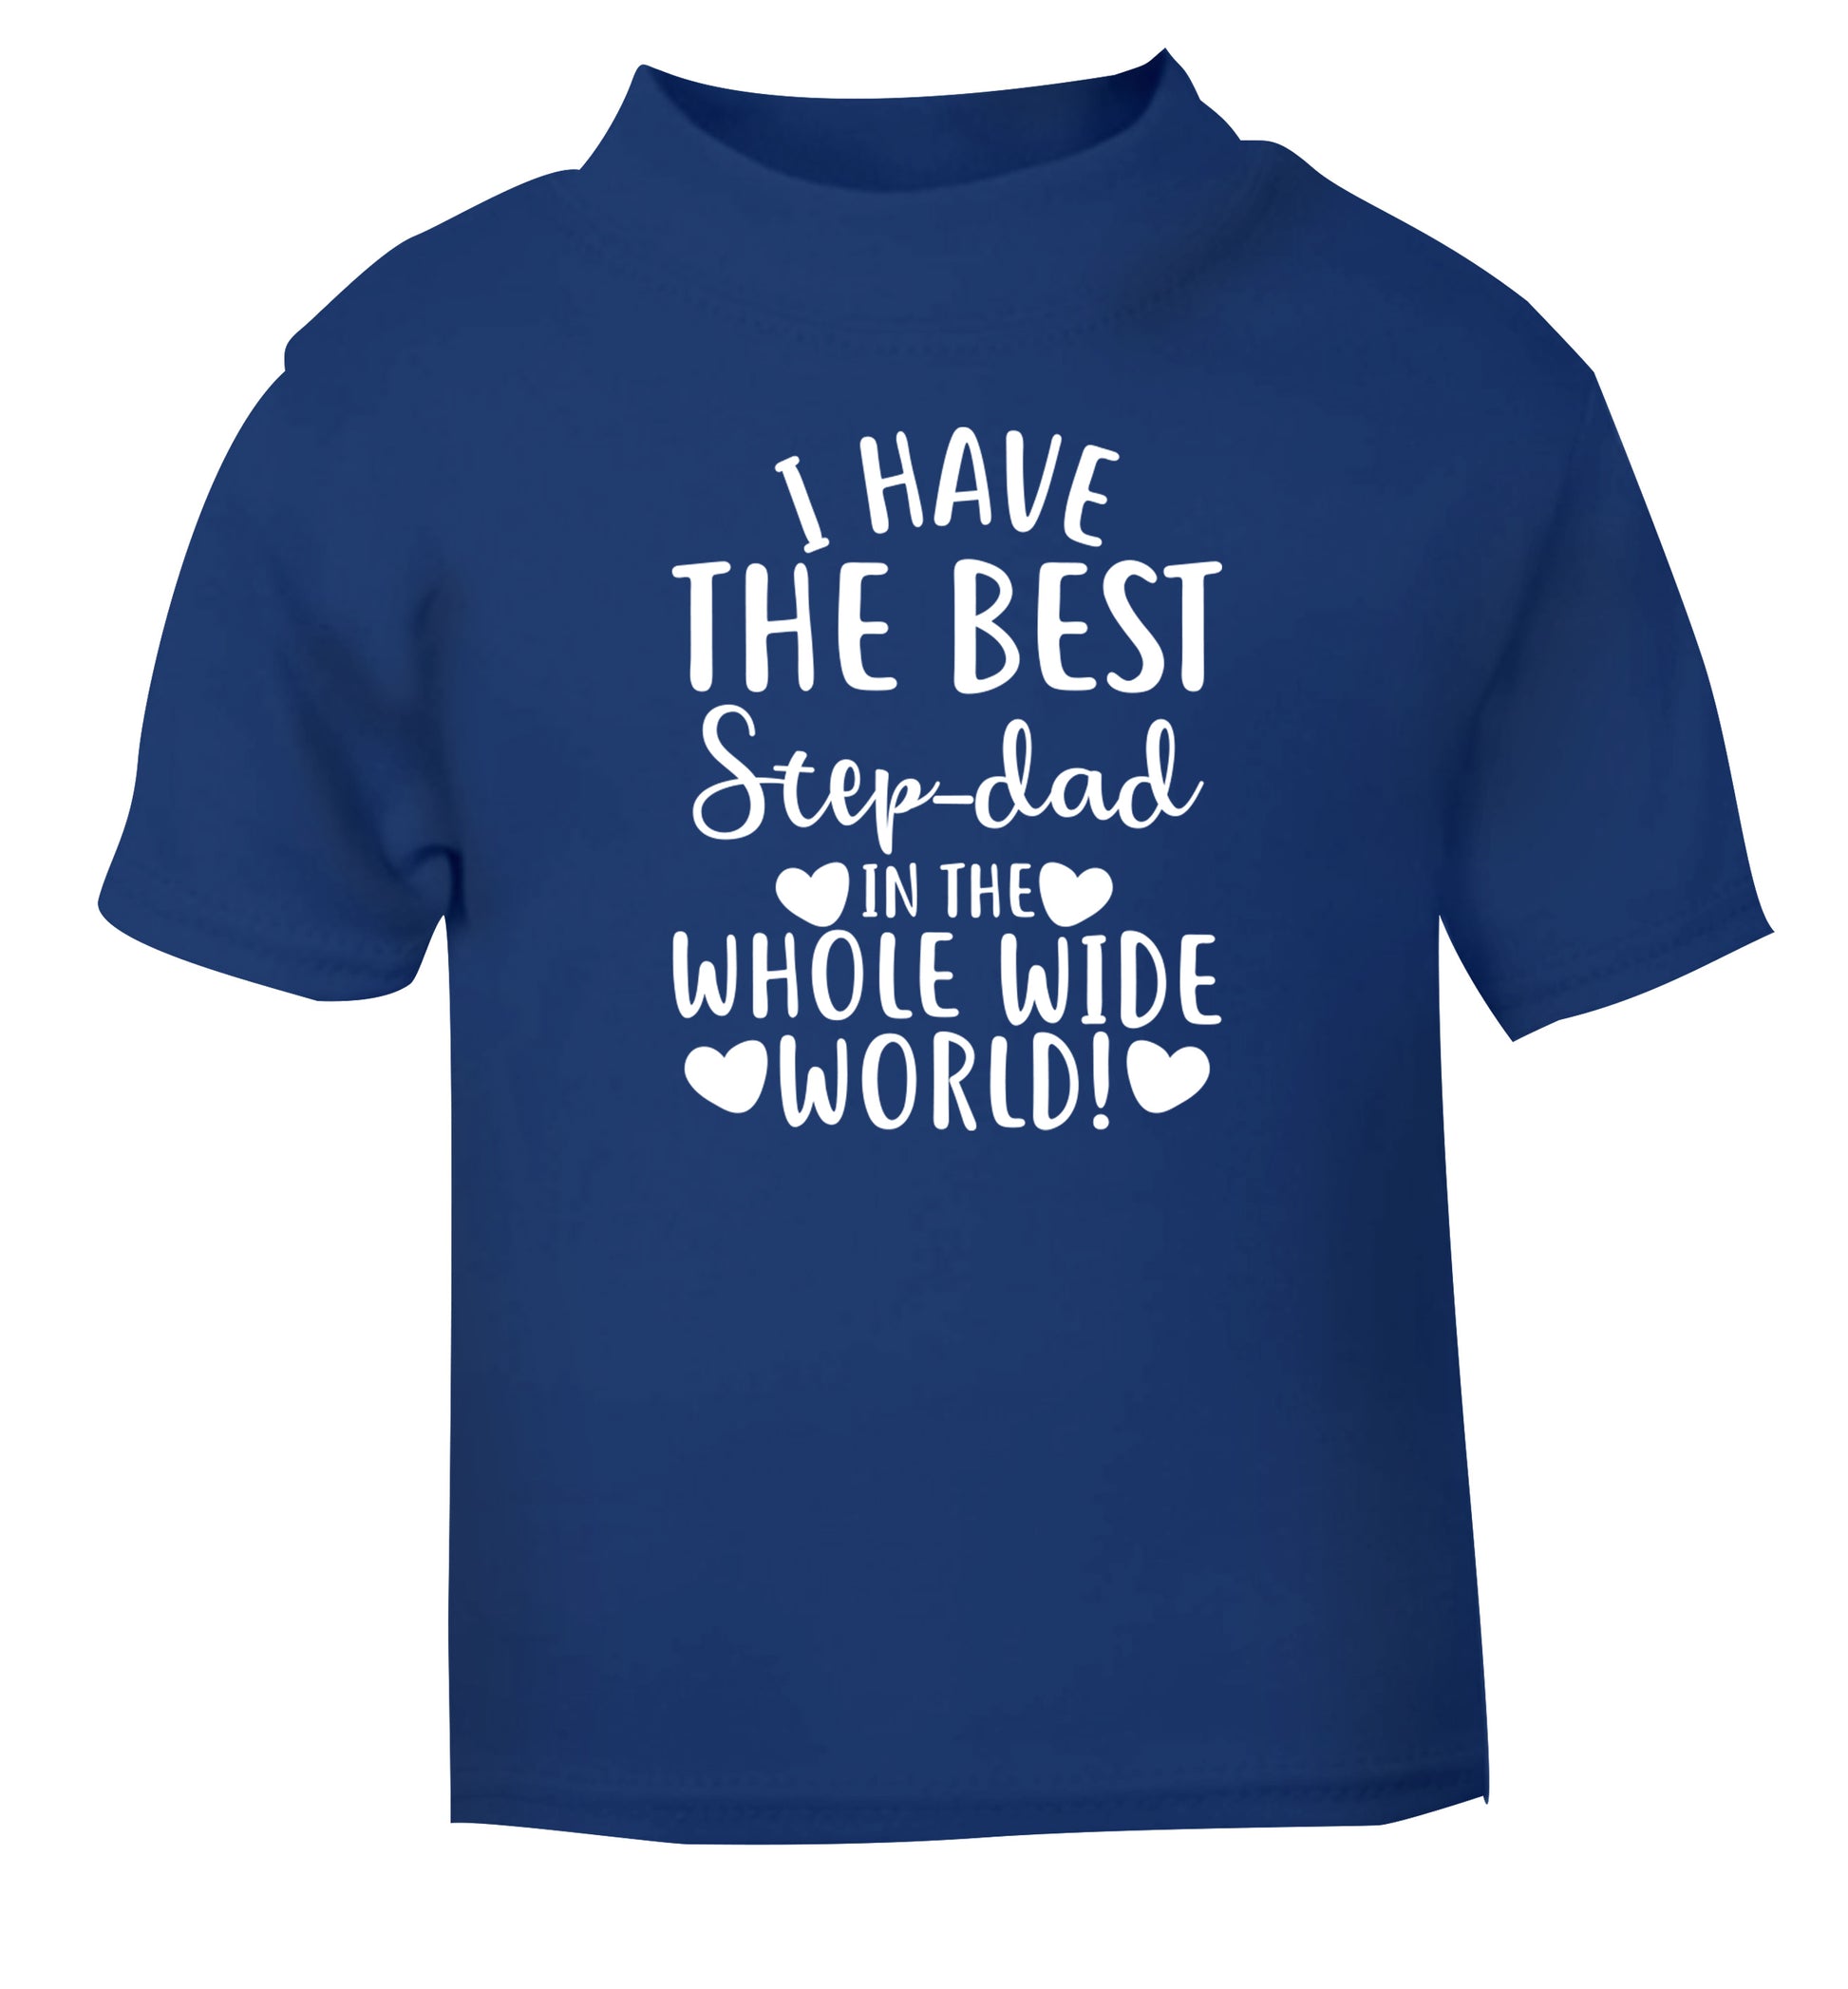 I have the best step-dad in the whole wide world! blue Baby Toddler Tshirt 2 Years